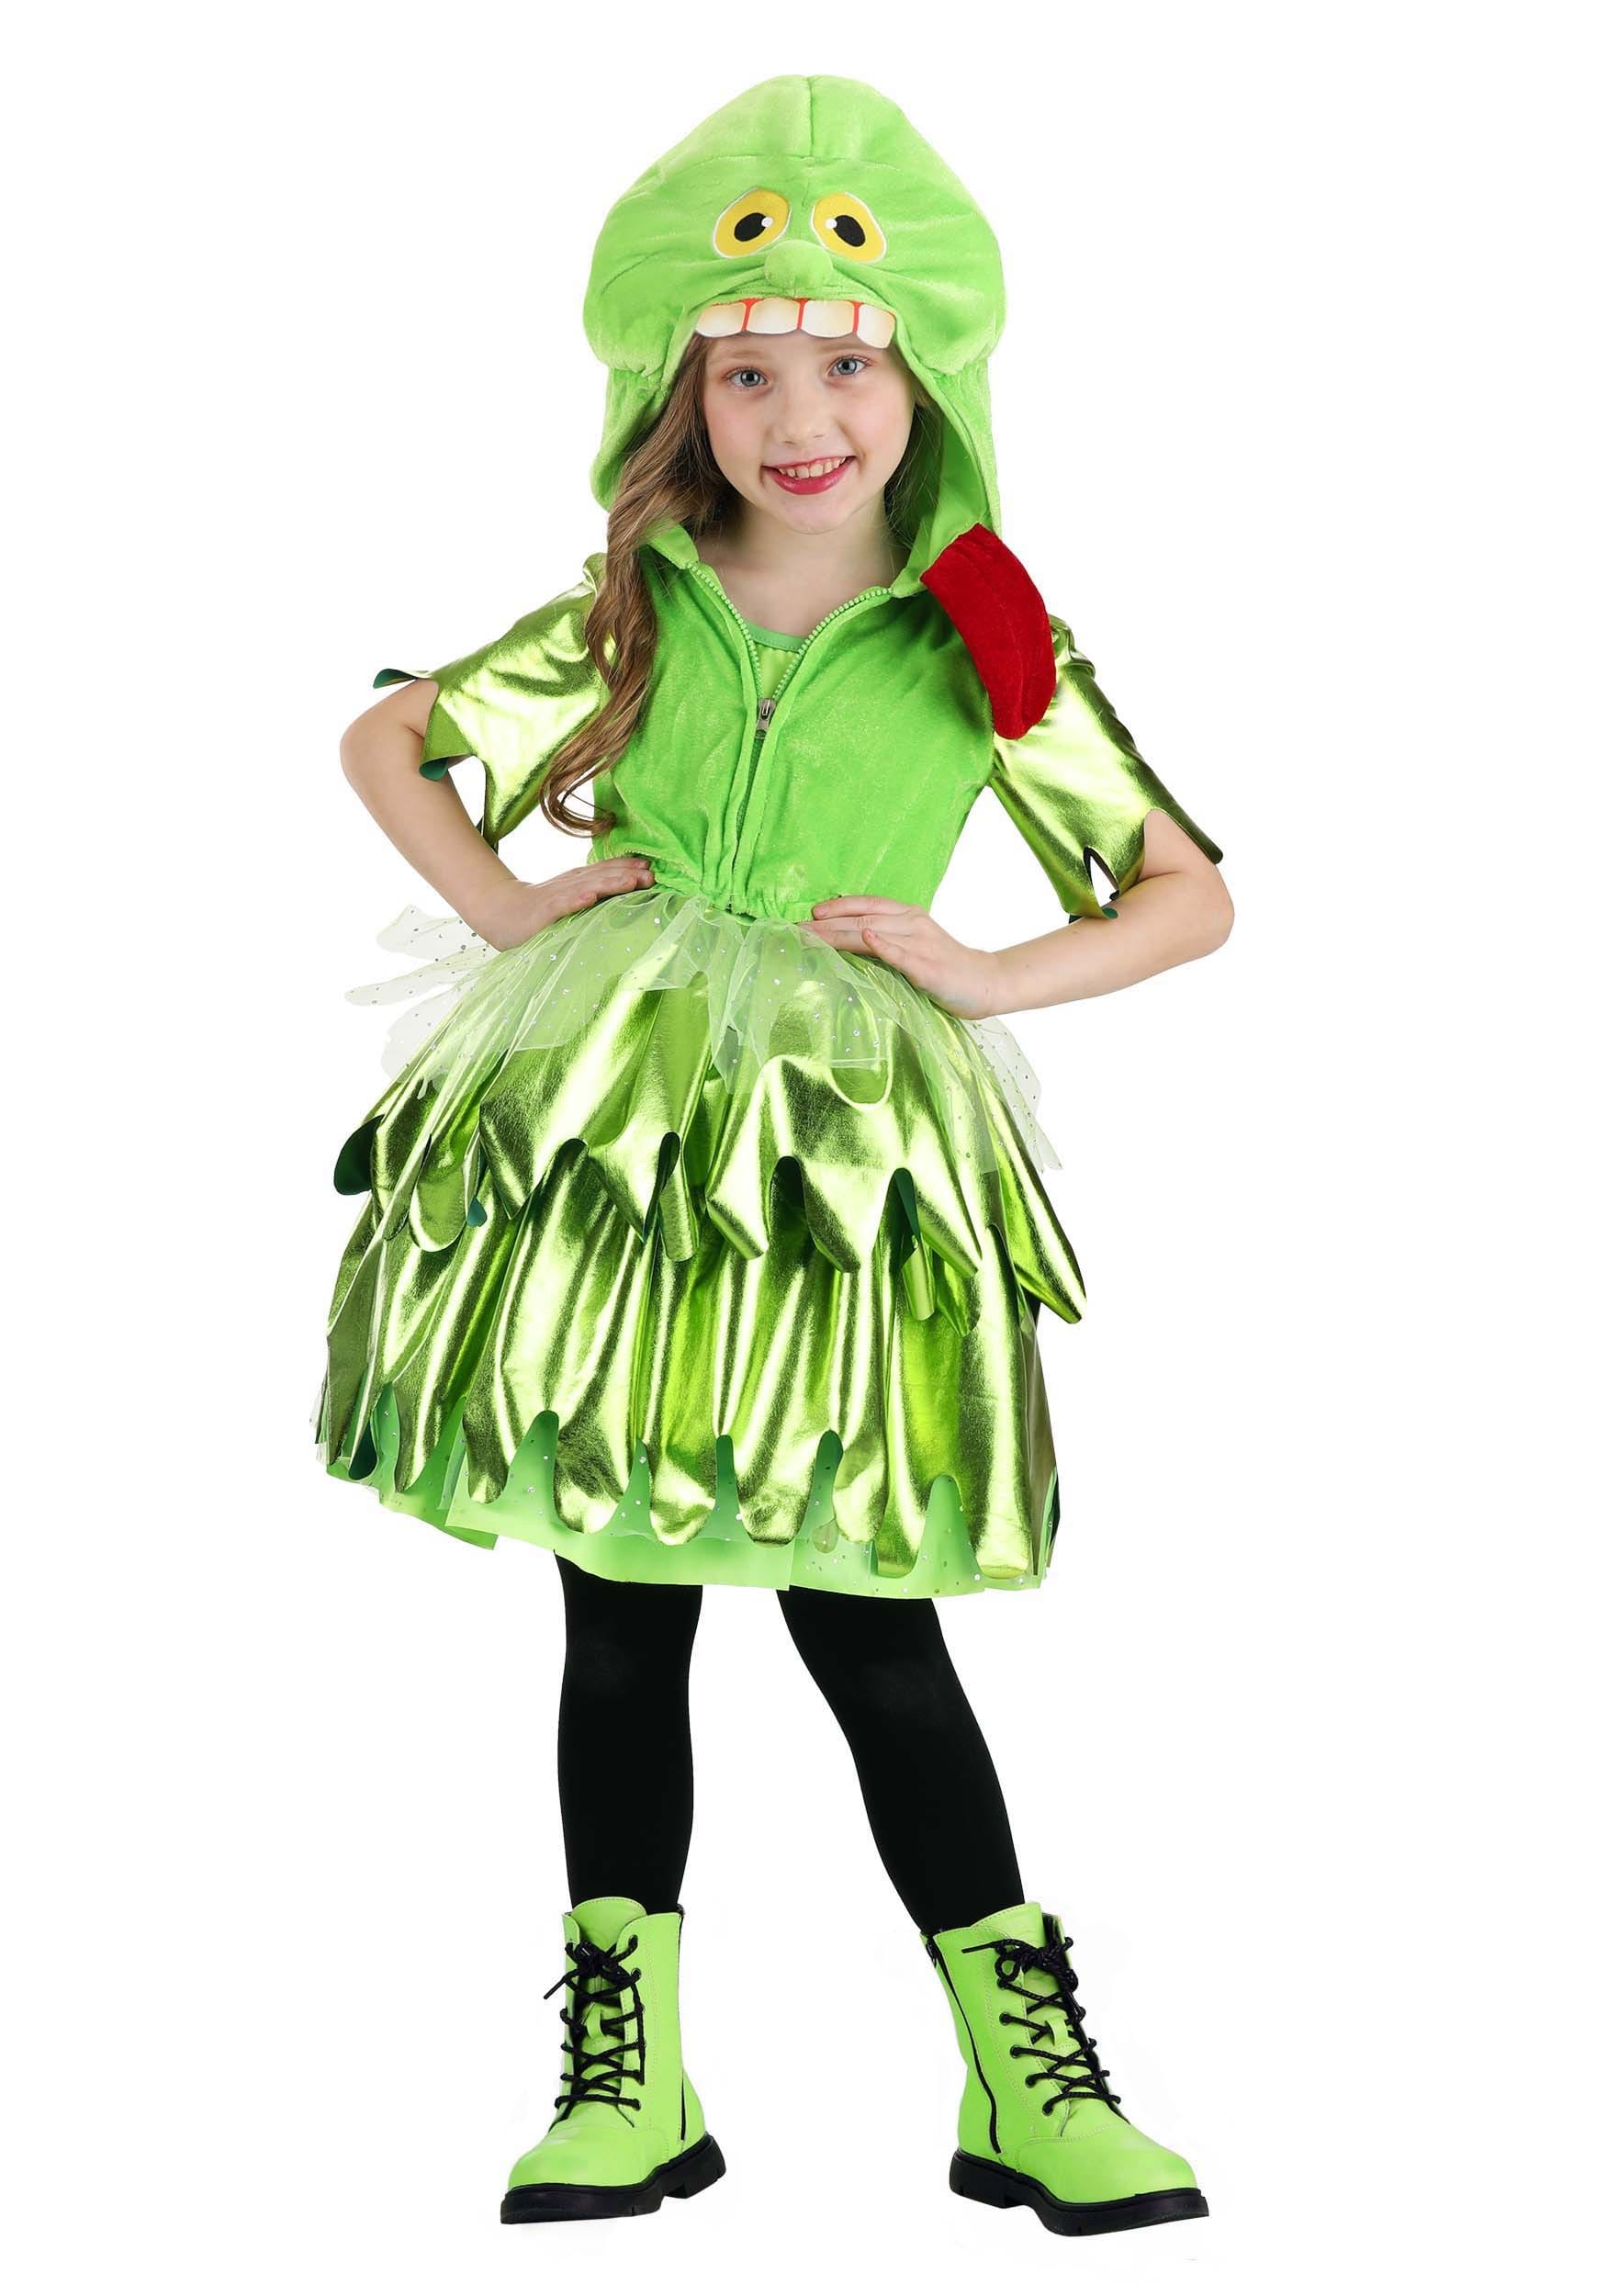 Photos - Fancy Dress Ghostbusters FUN Costumes  Slimer Girl's Costume Green/Red/Yellow 